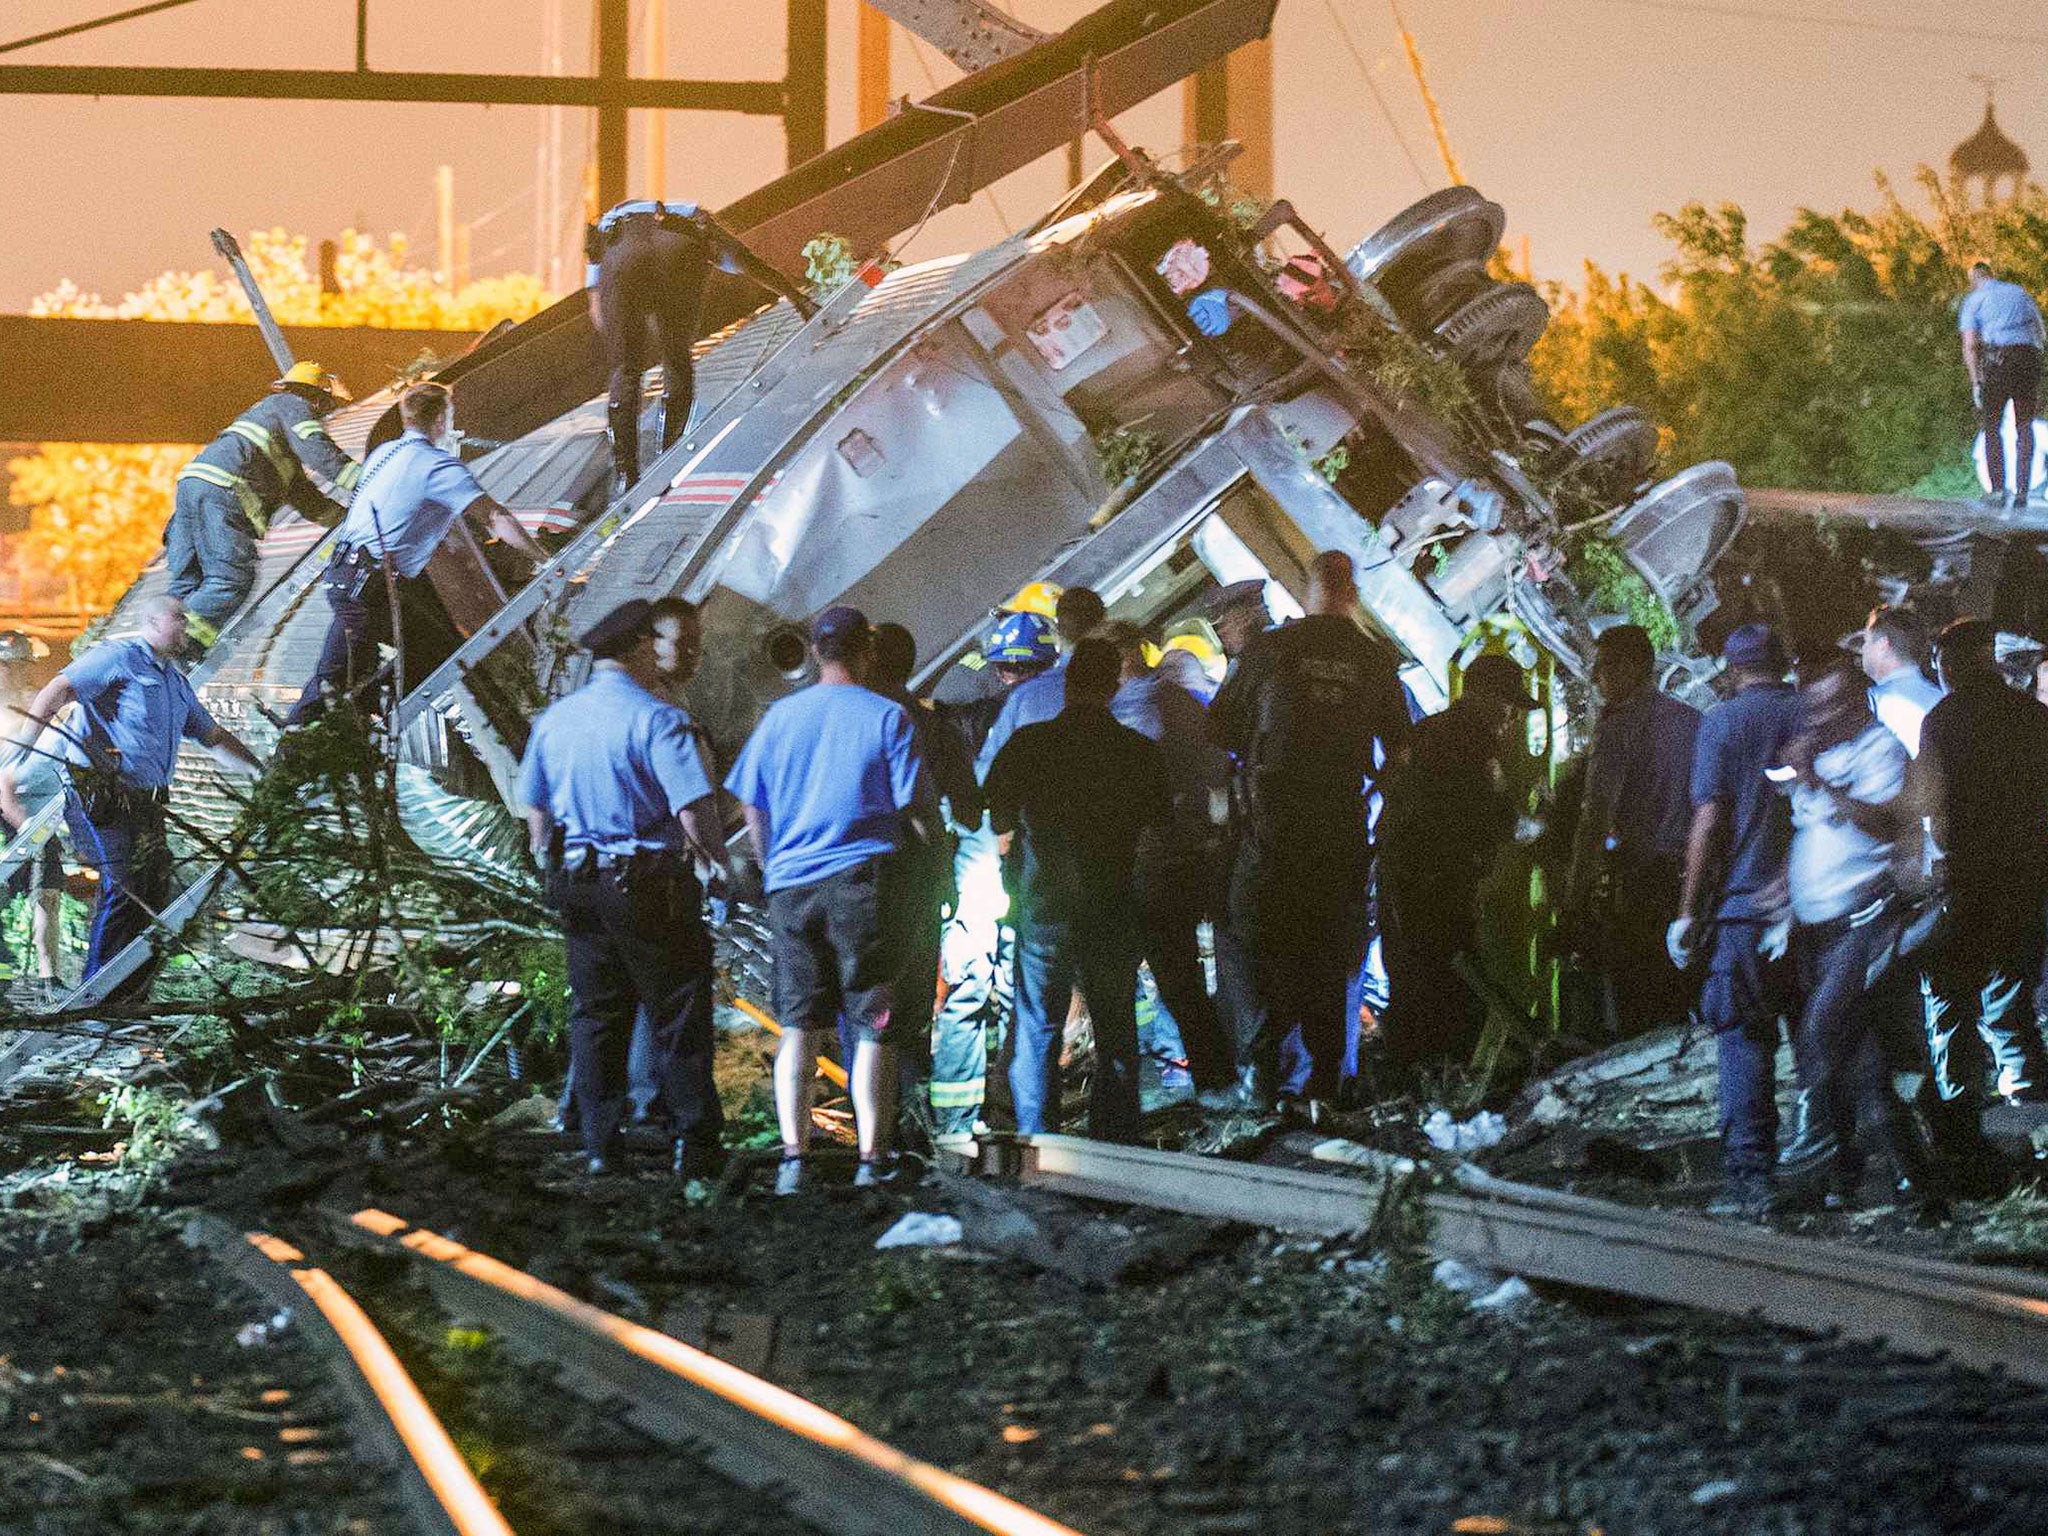 Emergency responders search for passengers following an Amtrak train derailment in the Frankfort section of Philadelphia